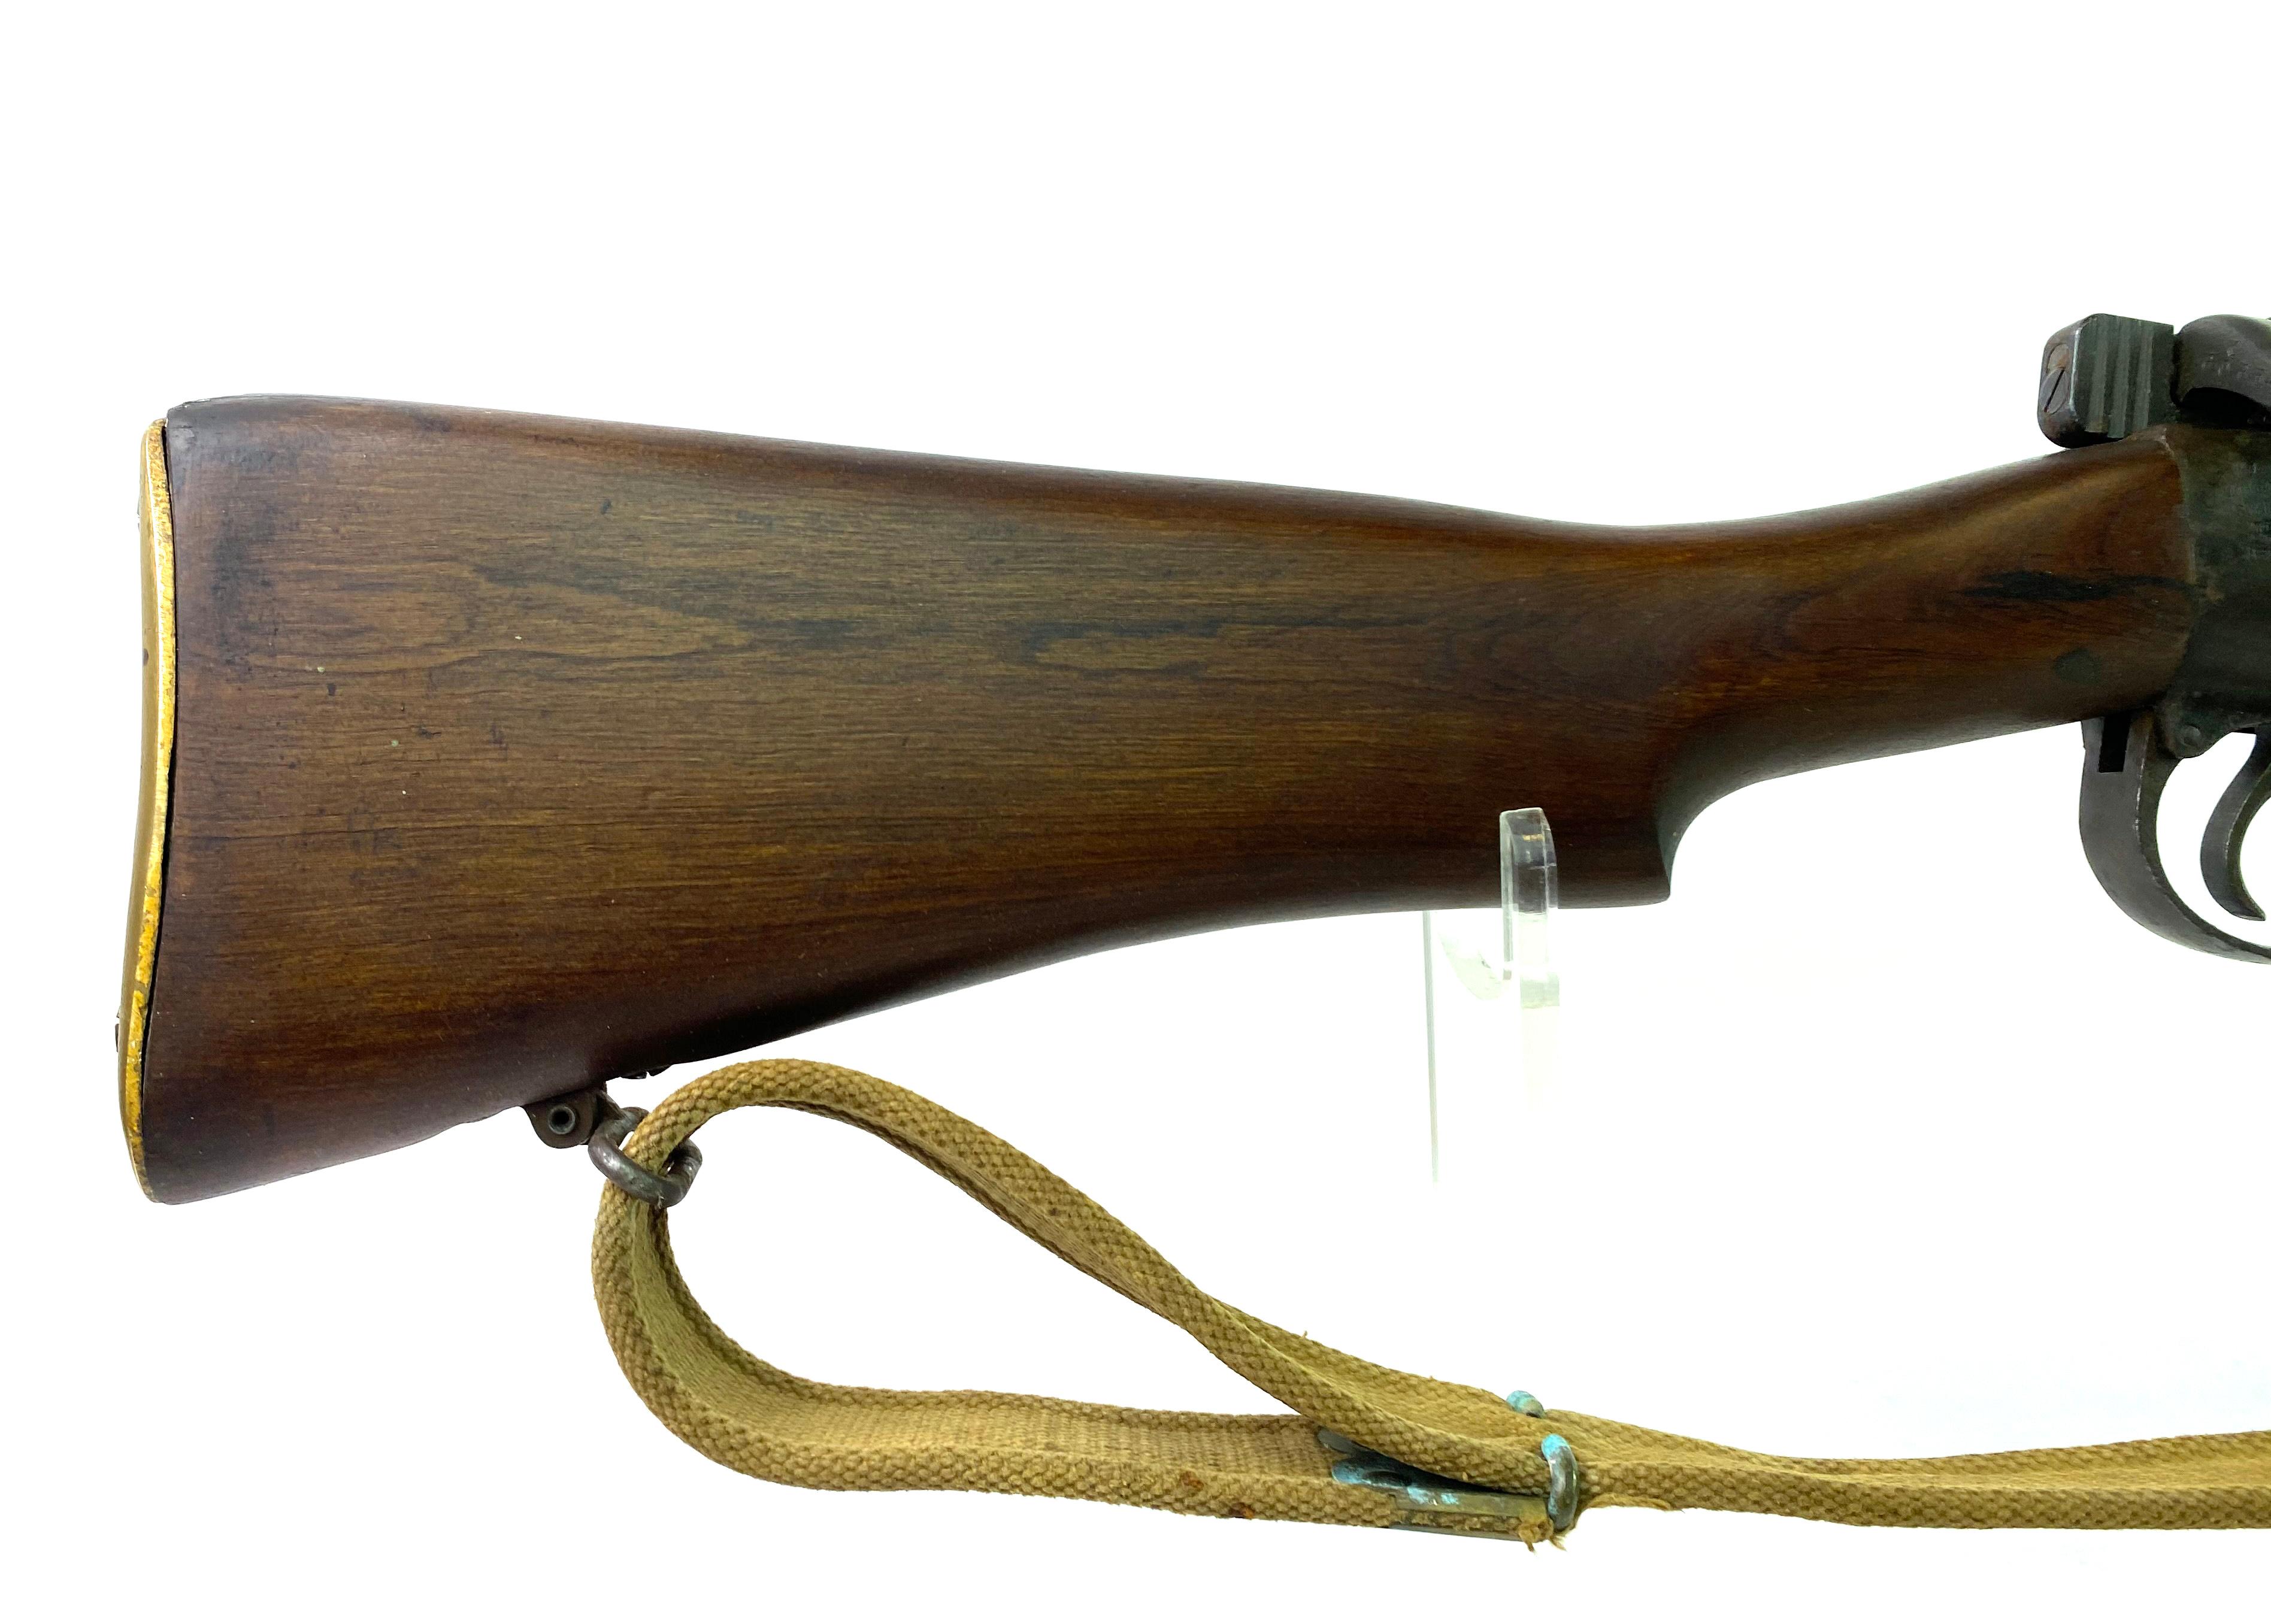 Excellent WWII 1941 Lee-Enfield MA Lithgow S.M.L.E. II "FTR" .303 British Bolt Action Rifle